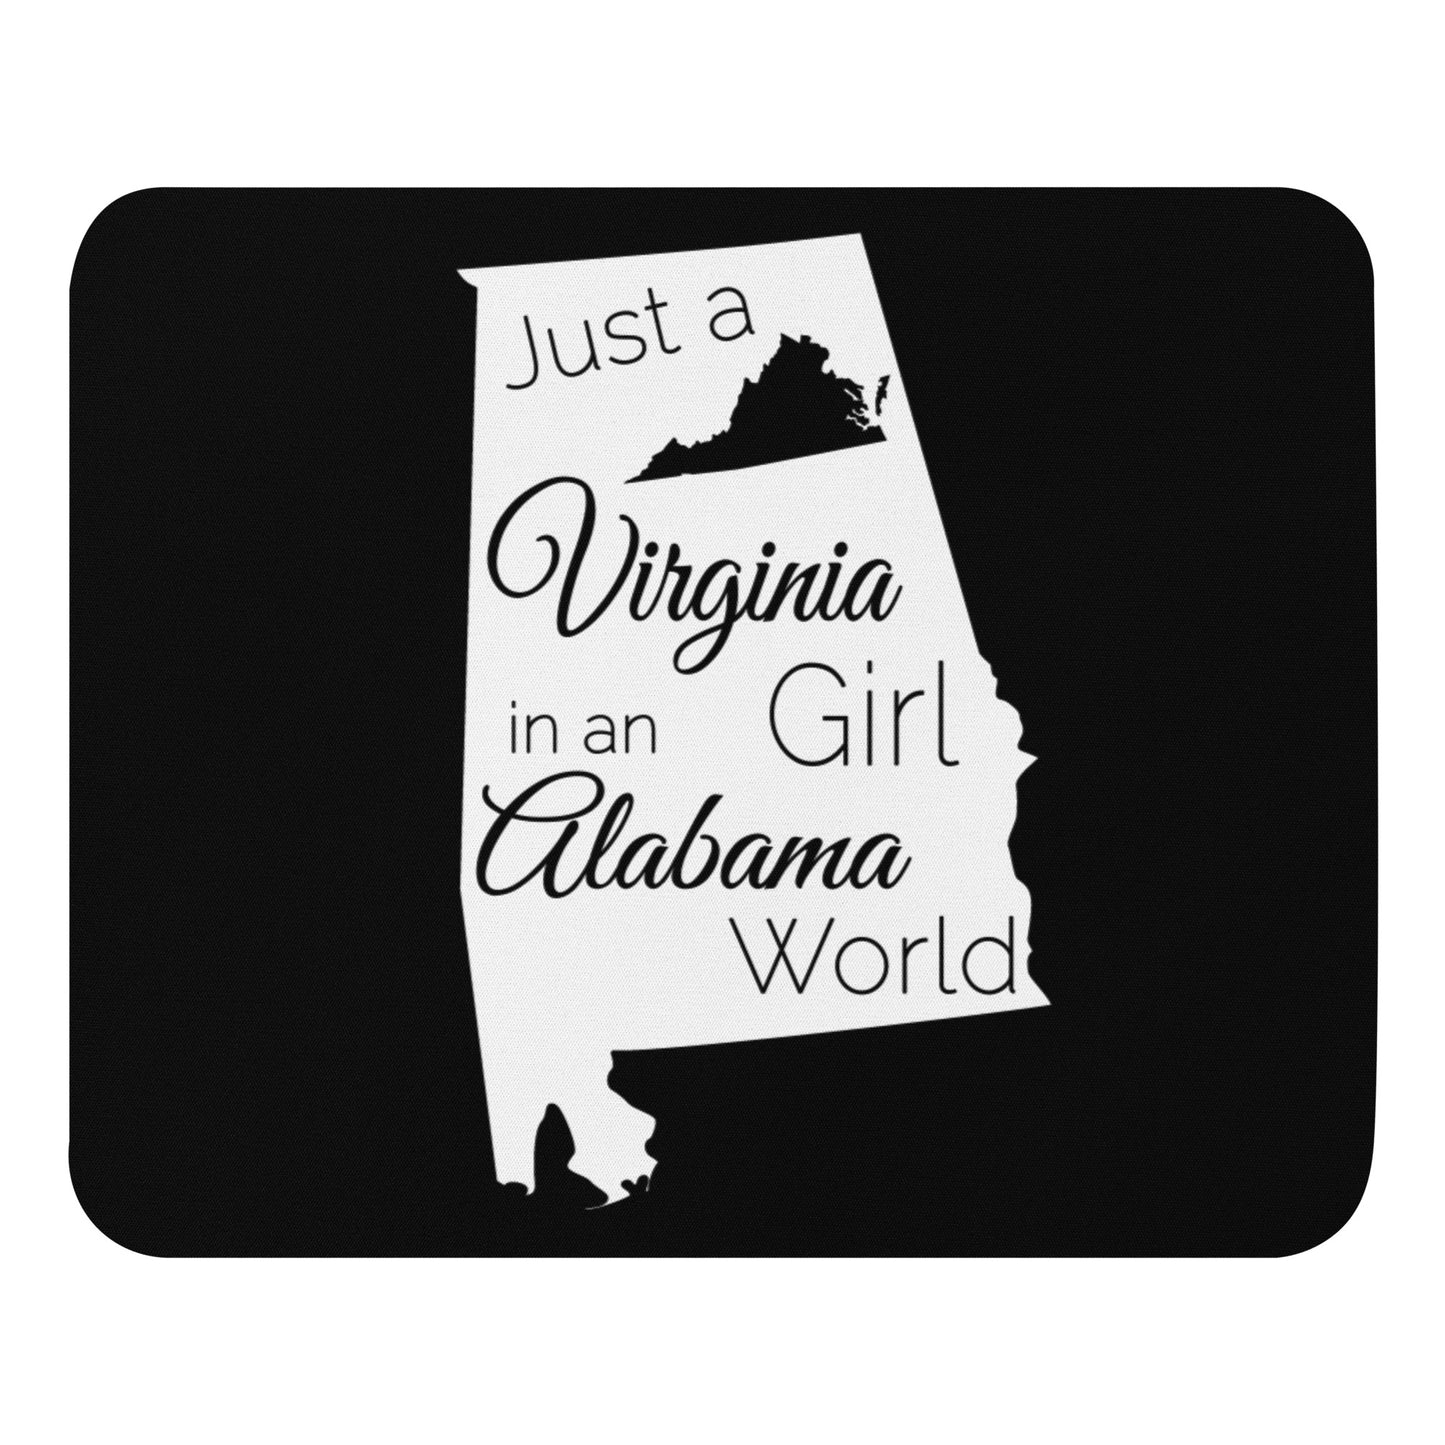 Just a Virginia Girl in an Alabama World Mouse pad